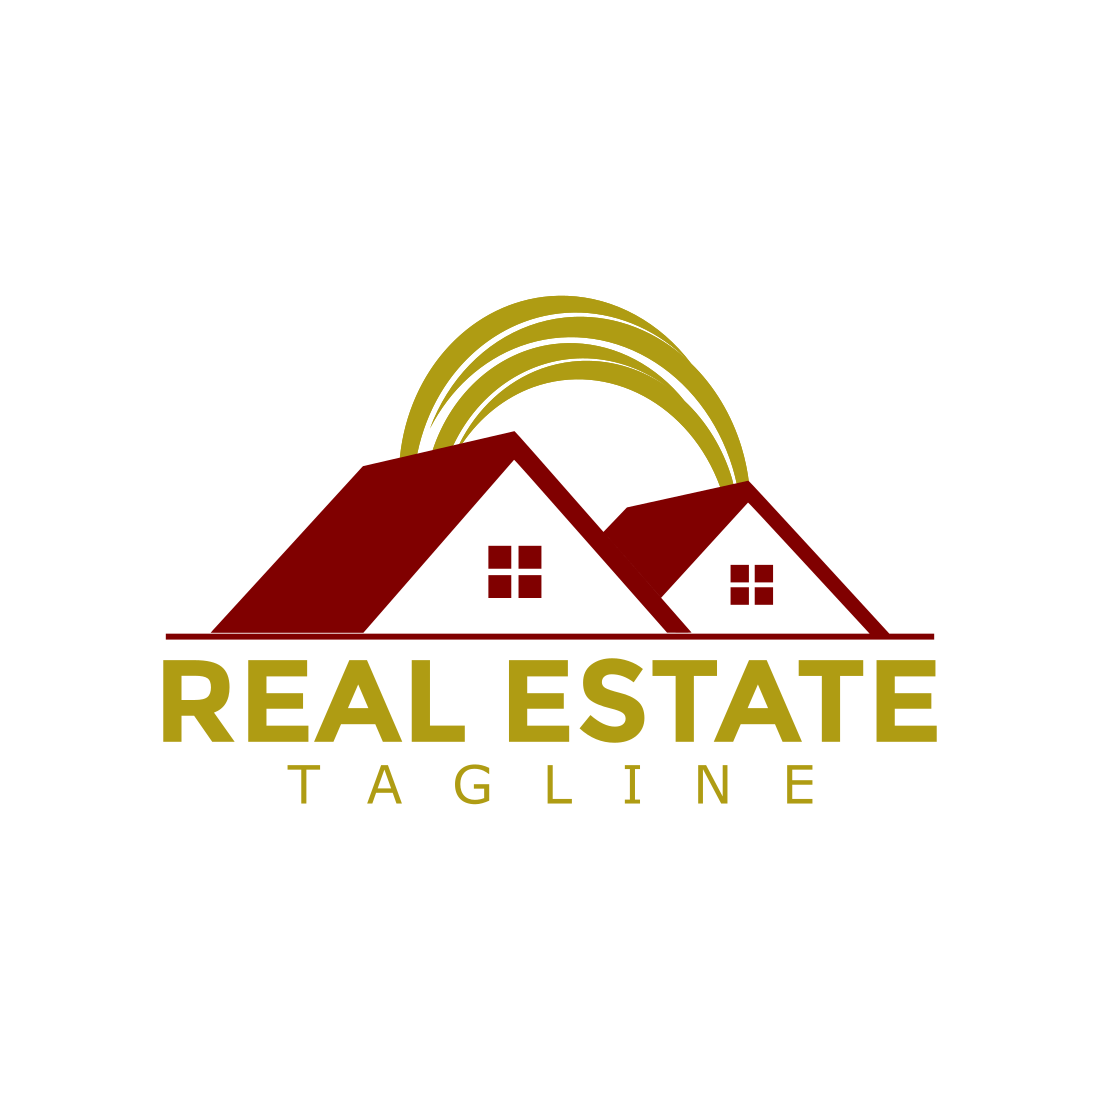 Cool Real Estate Logo Design Template cover image.